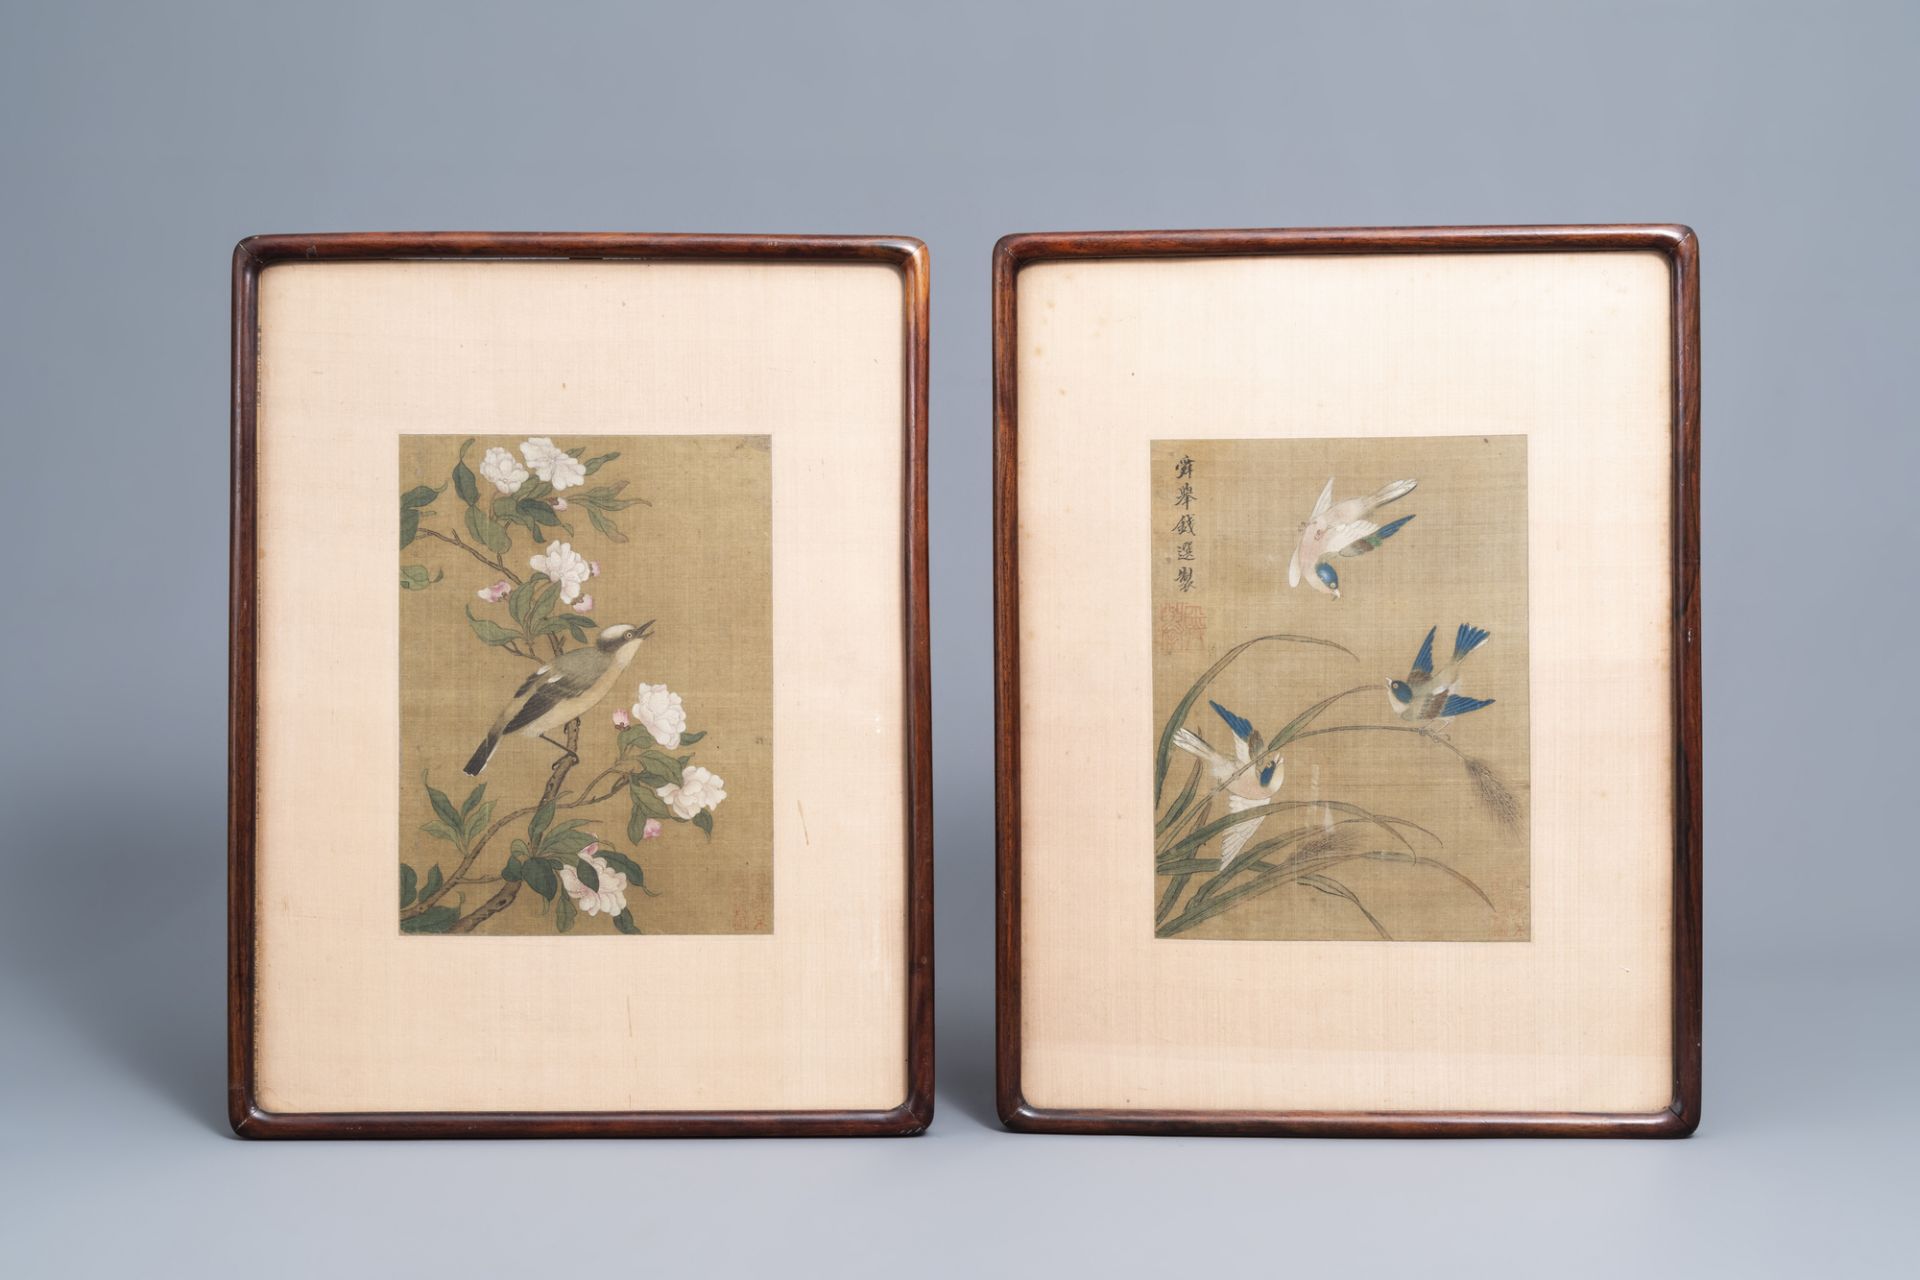 Chinese school, ink and colours on silk, 19th/20th C.: Two works depicting birds between blossoming